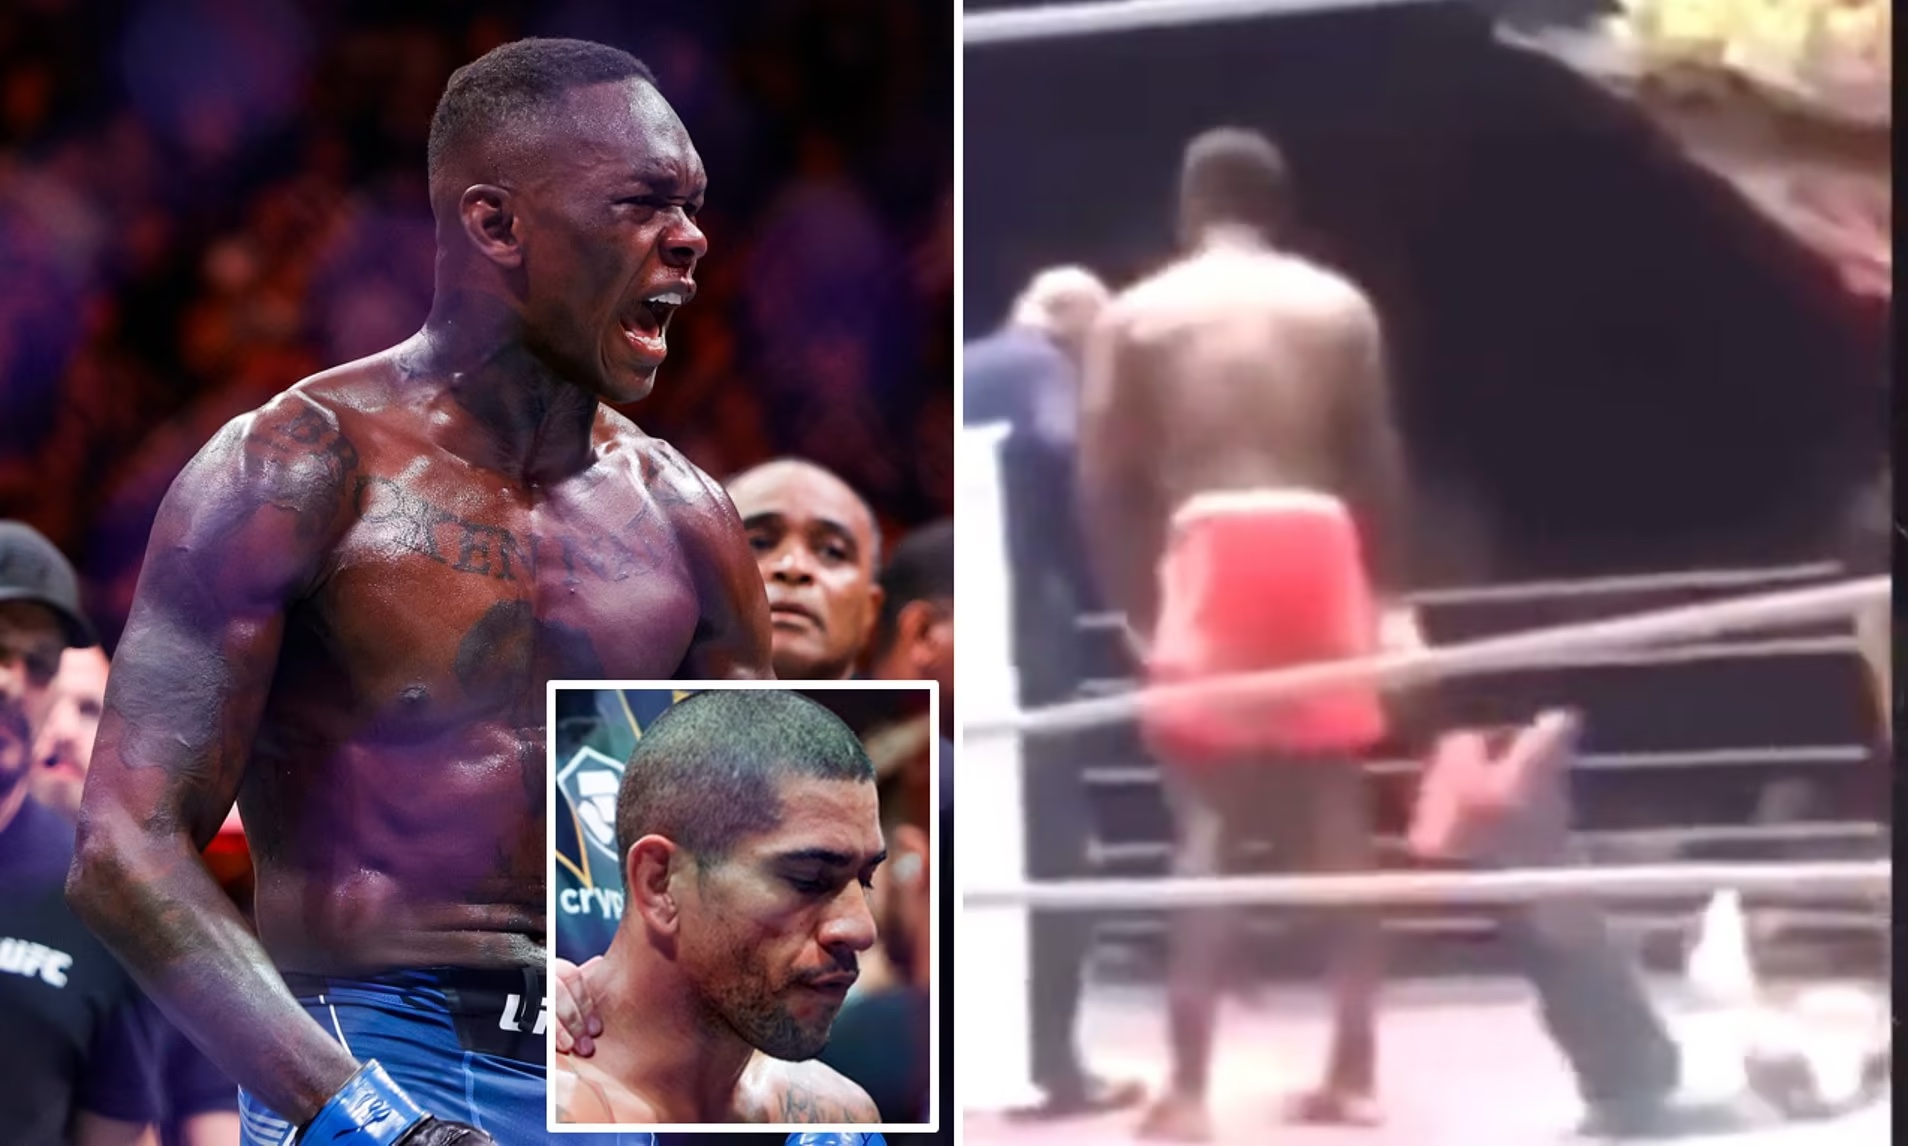 I did him a favor, now he has a life lesson – Israel Adesanya speaks on mimicking Alex Pereira’s 12-year-old son after defeating his father as revenge for the child’s same taunt in 2017